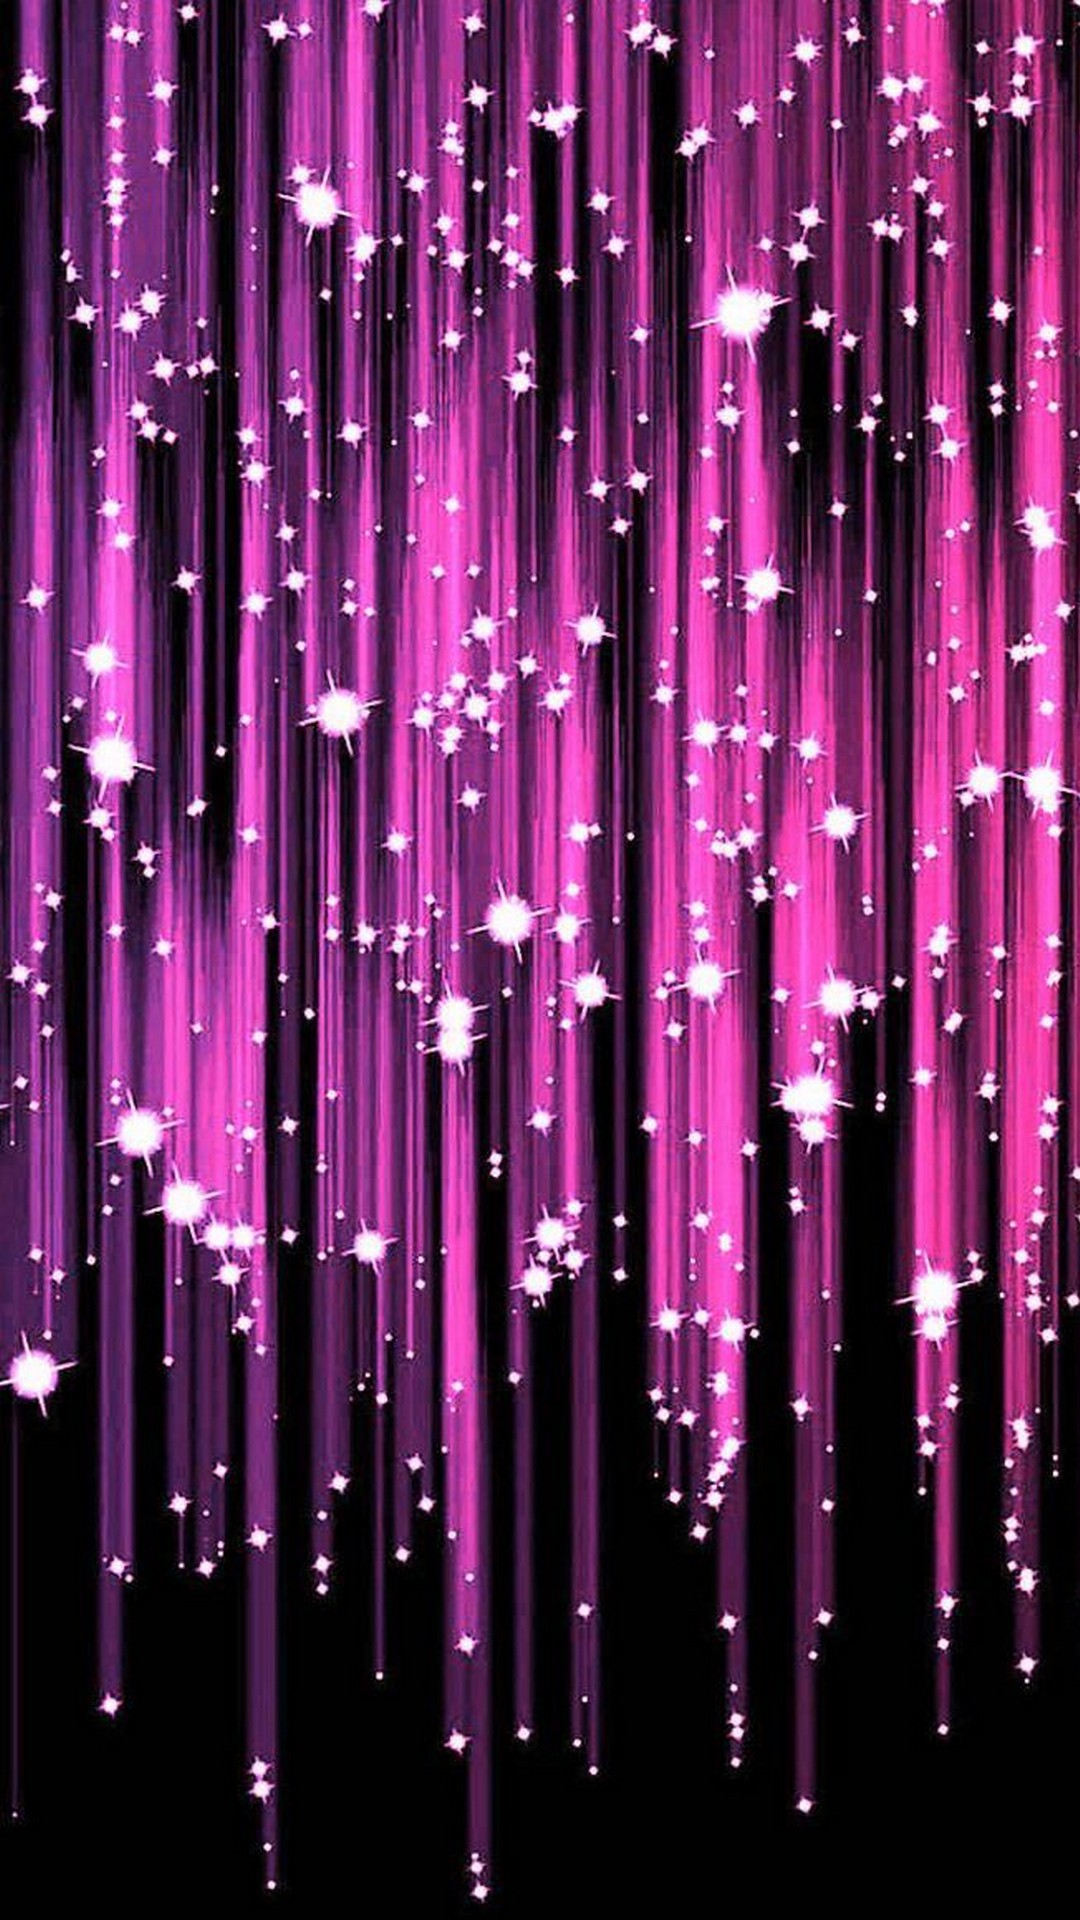 Pink Sparkle iPhone Wallpaper resolution 1080x1920